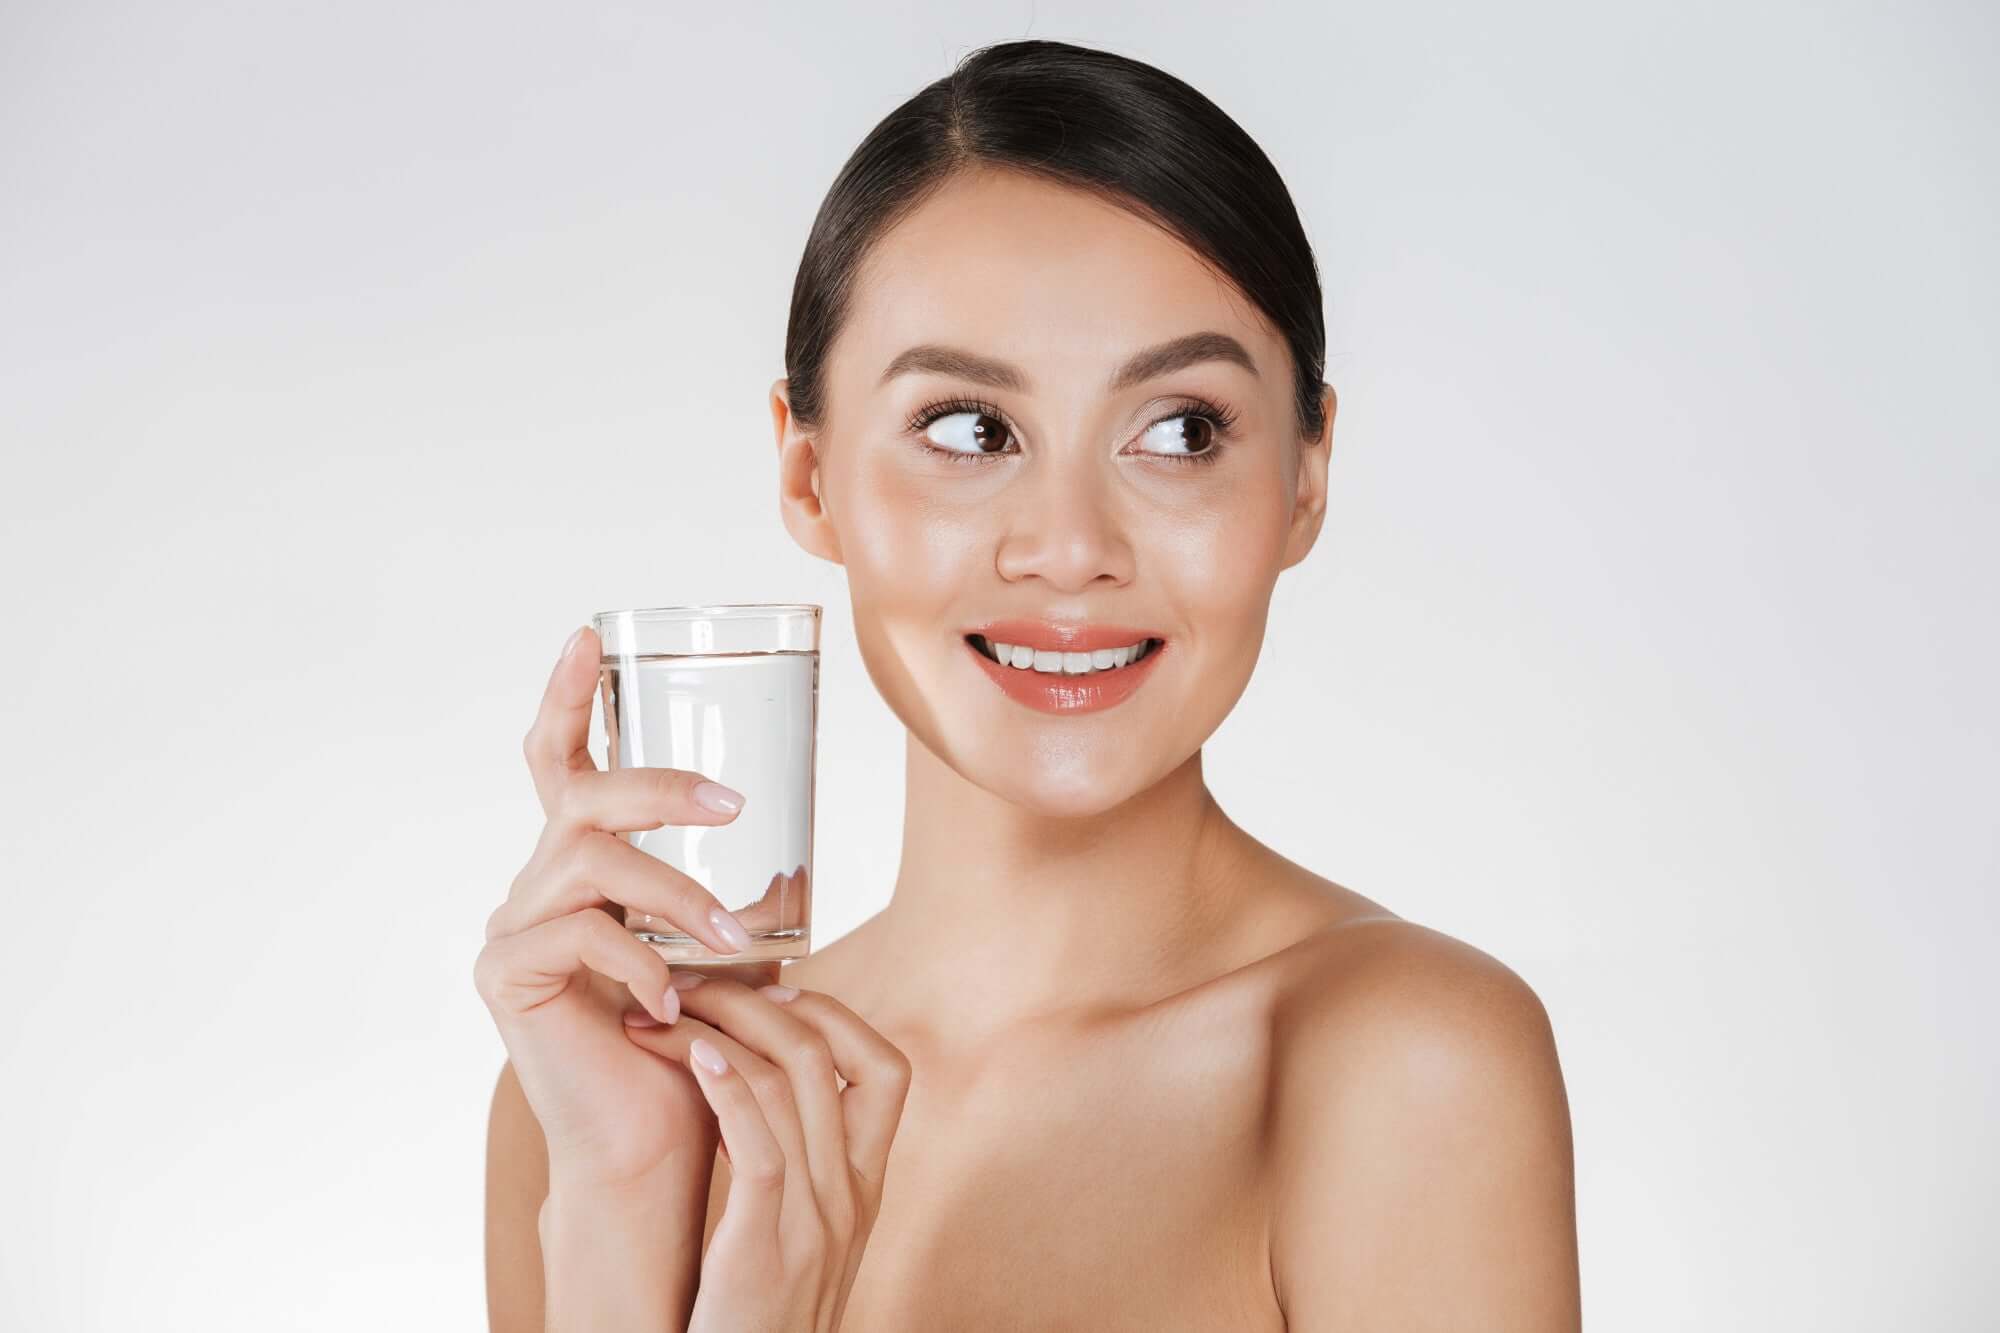 Woman who is naked down to shoulder level and is holding a clear glass with water